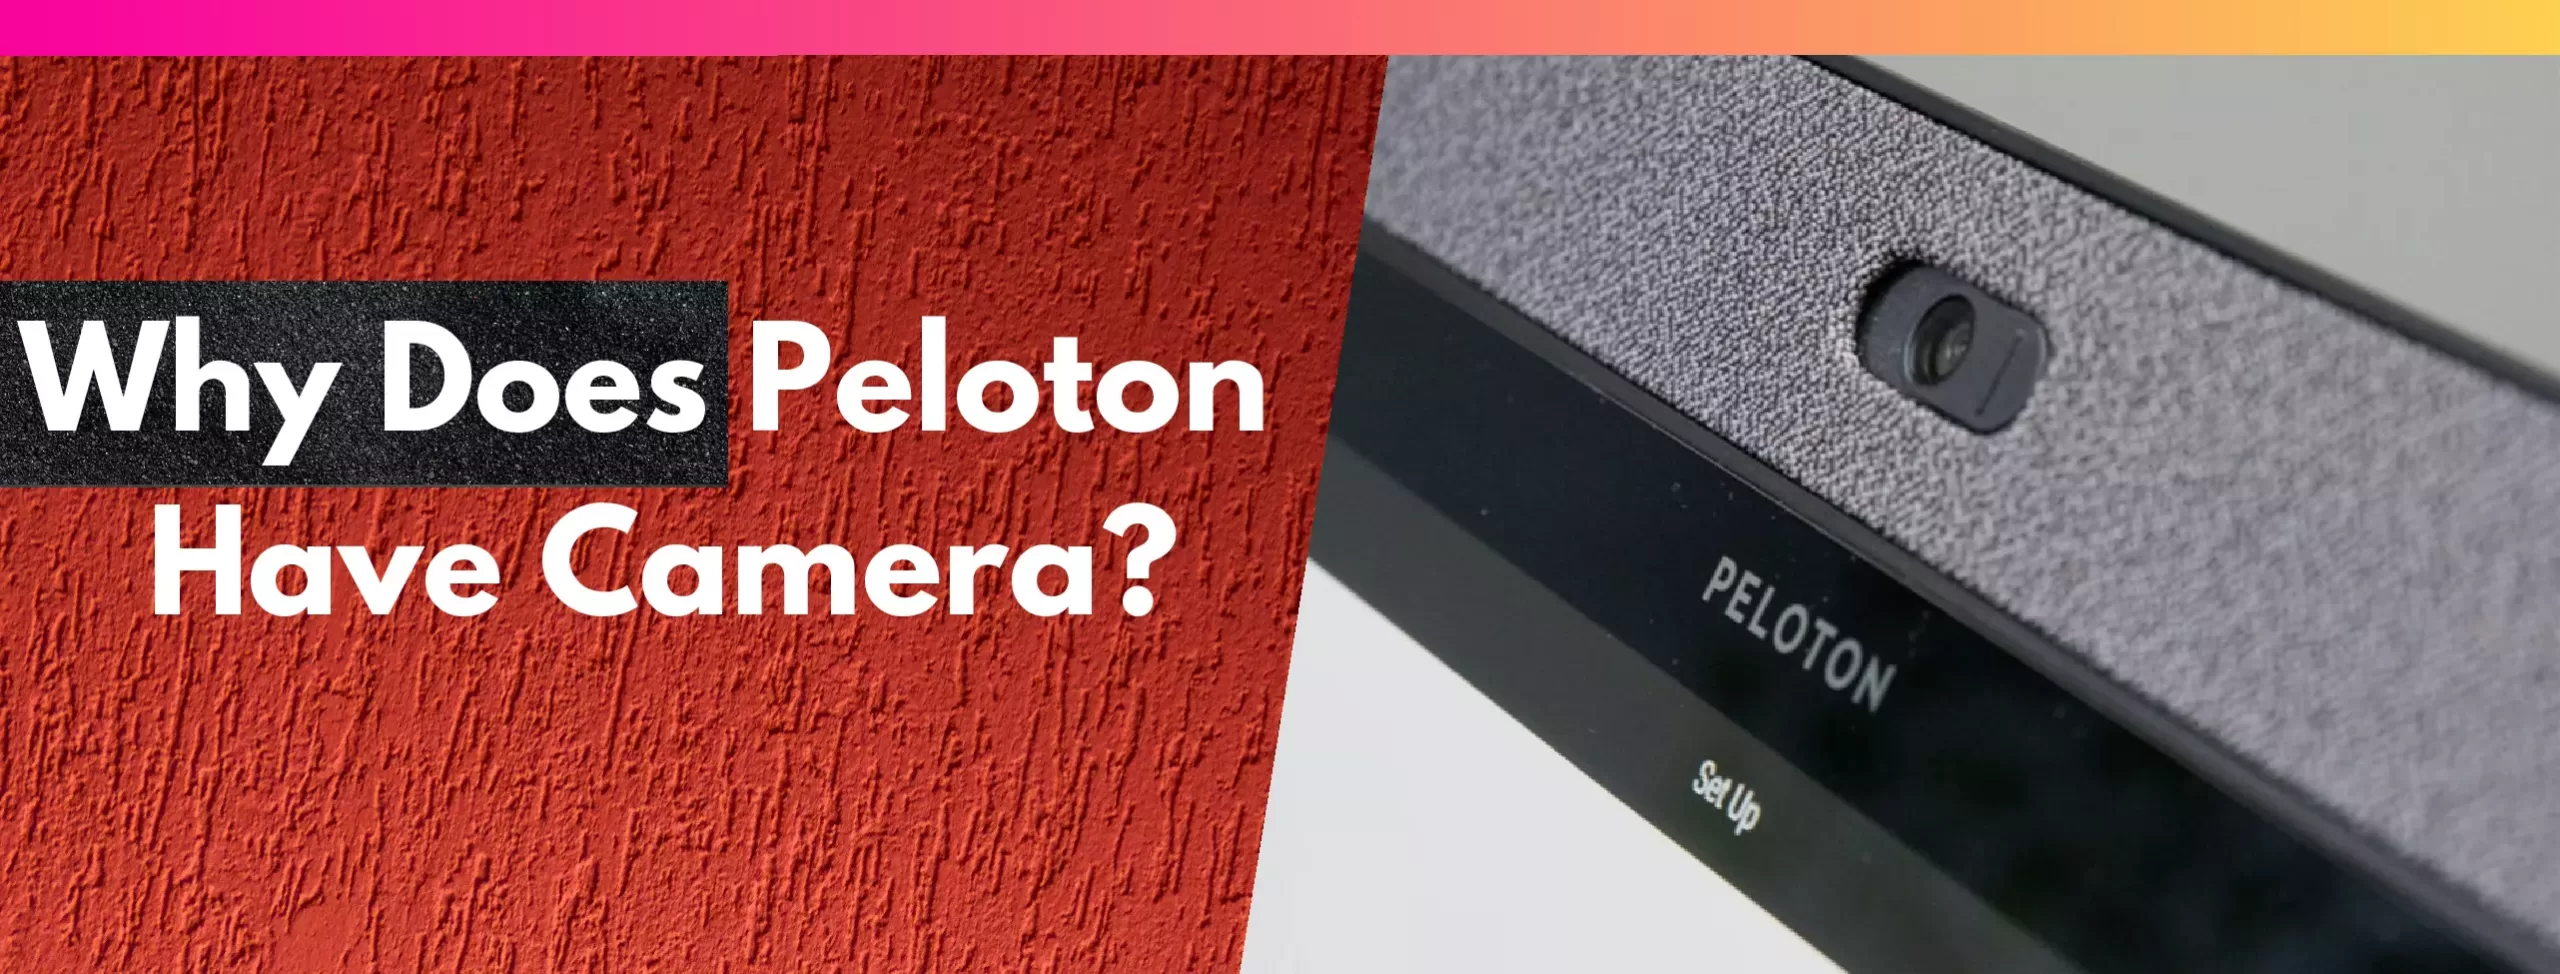 Why Does Peloton Have Camera